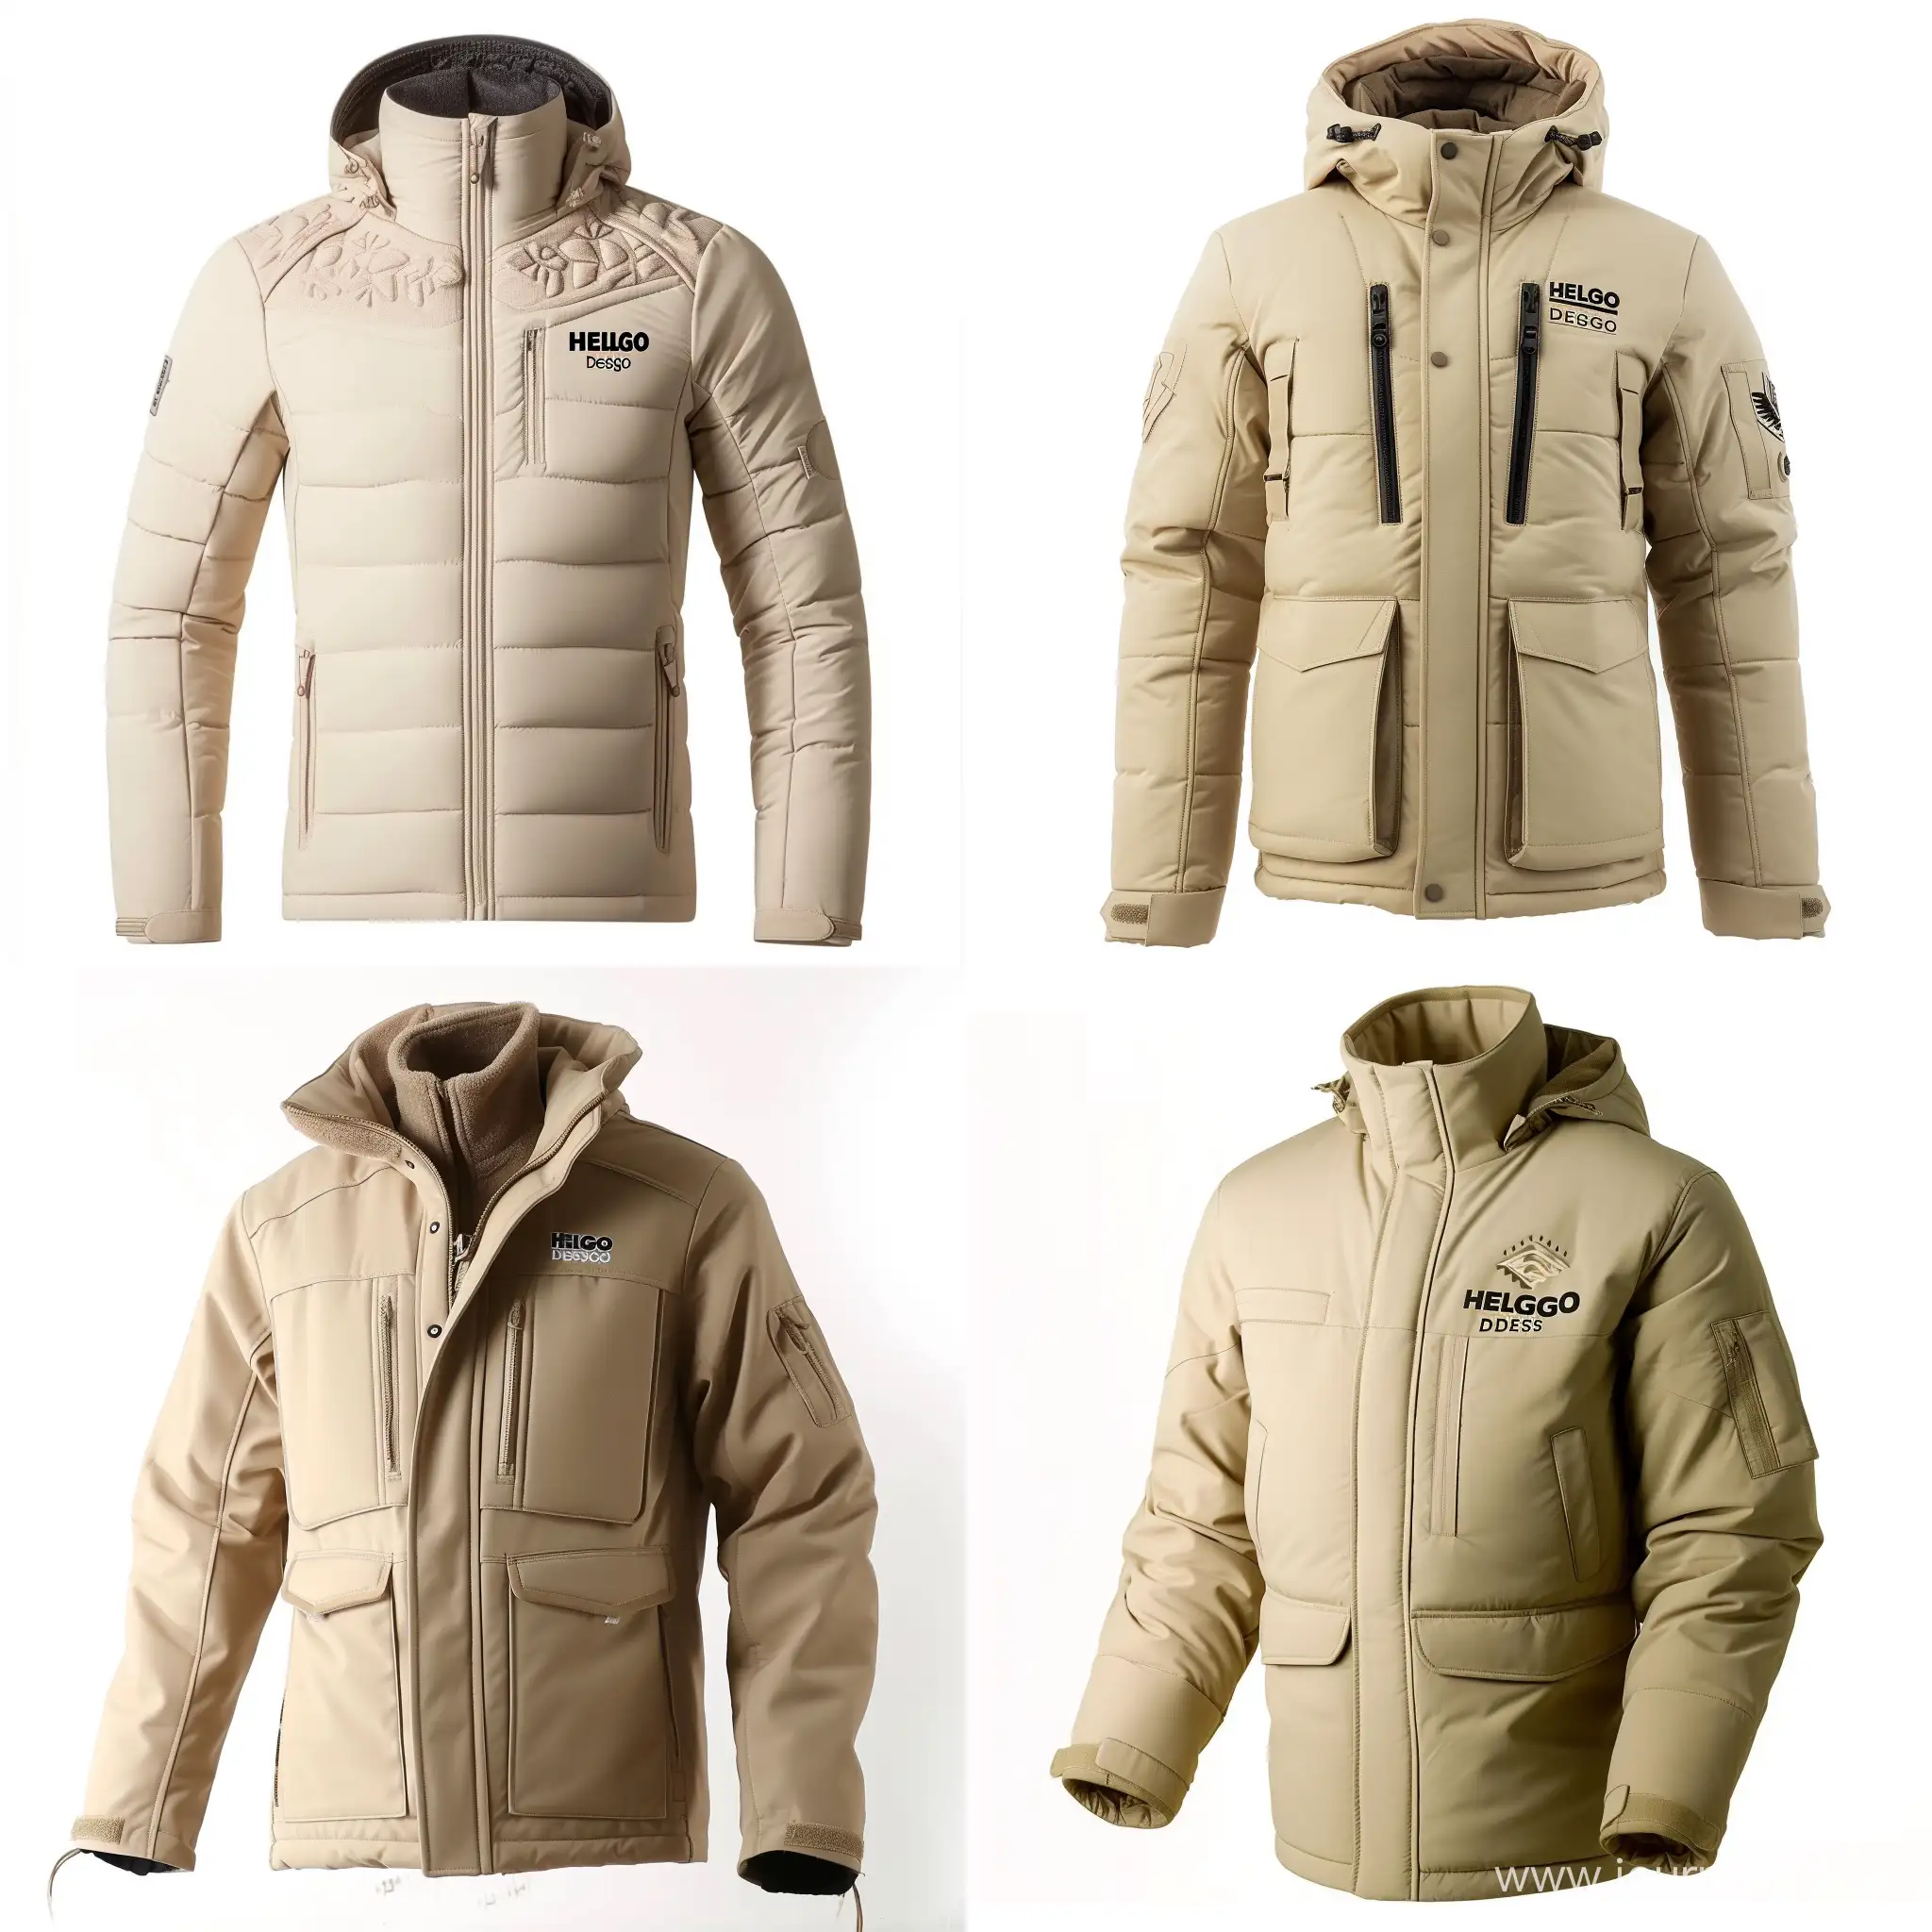 Make a beige winter jacket with a logo that says "Helgo Design", show the whole jacket
